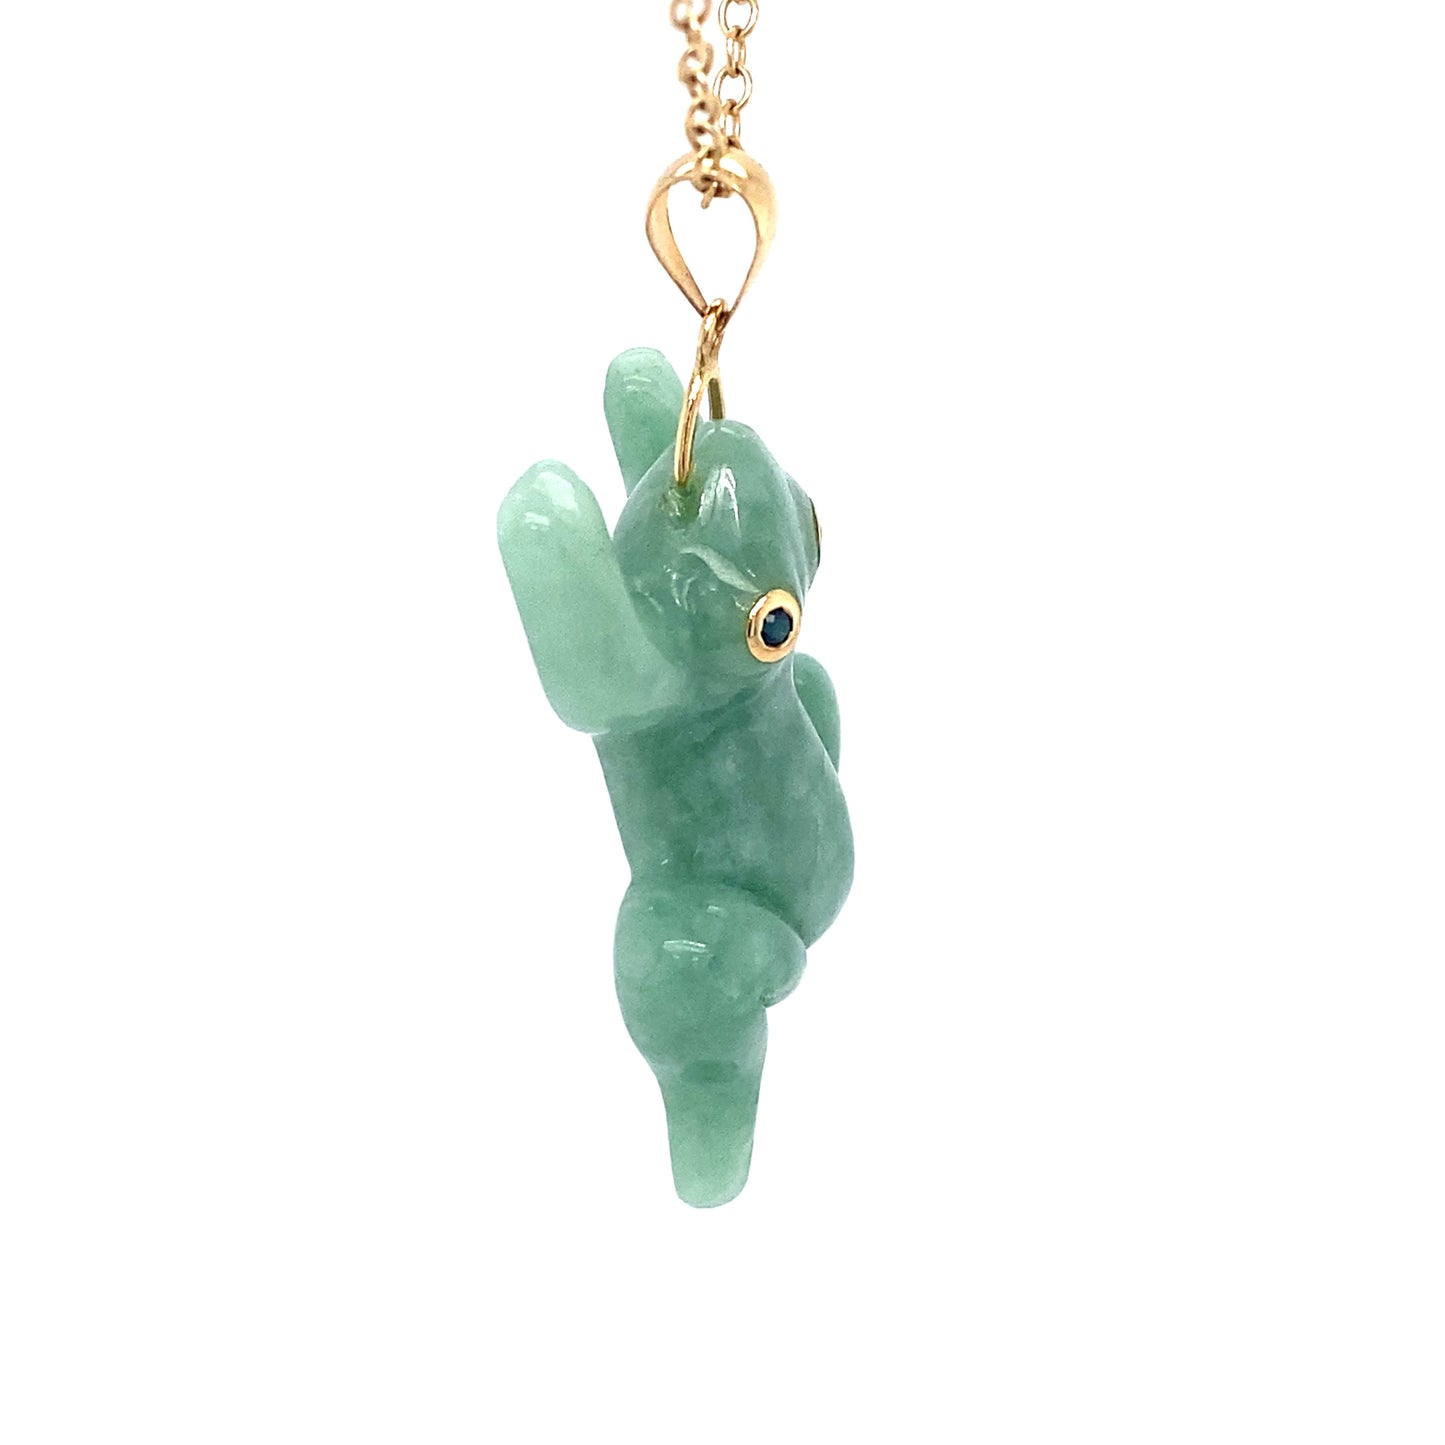 Circa 1980 Green Jade Frog Pendant with Sapphire Eyes in 14K Gold